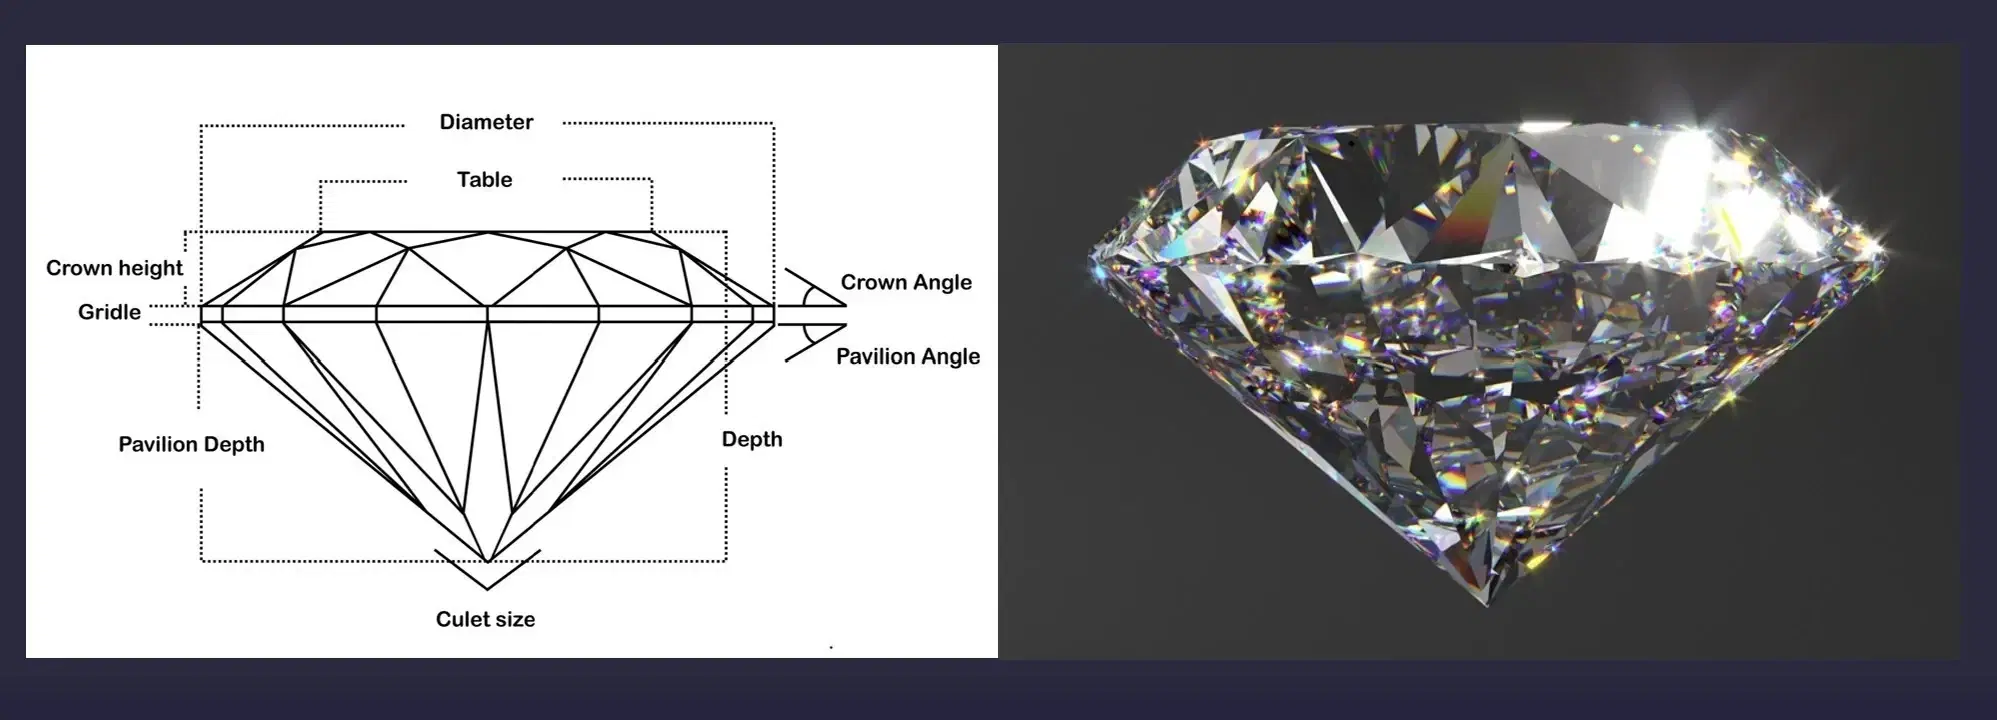 Diamond Crown Angle: A Cut Element Not to Overlook